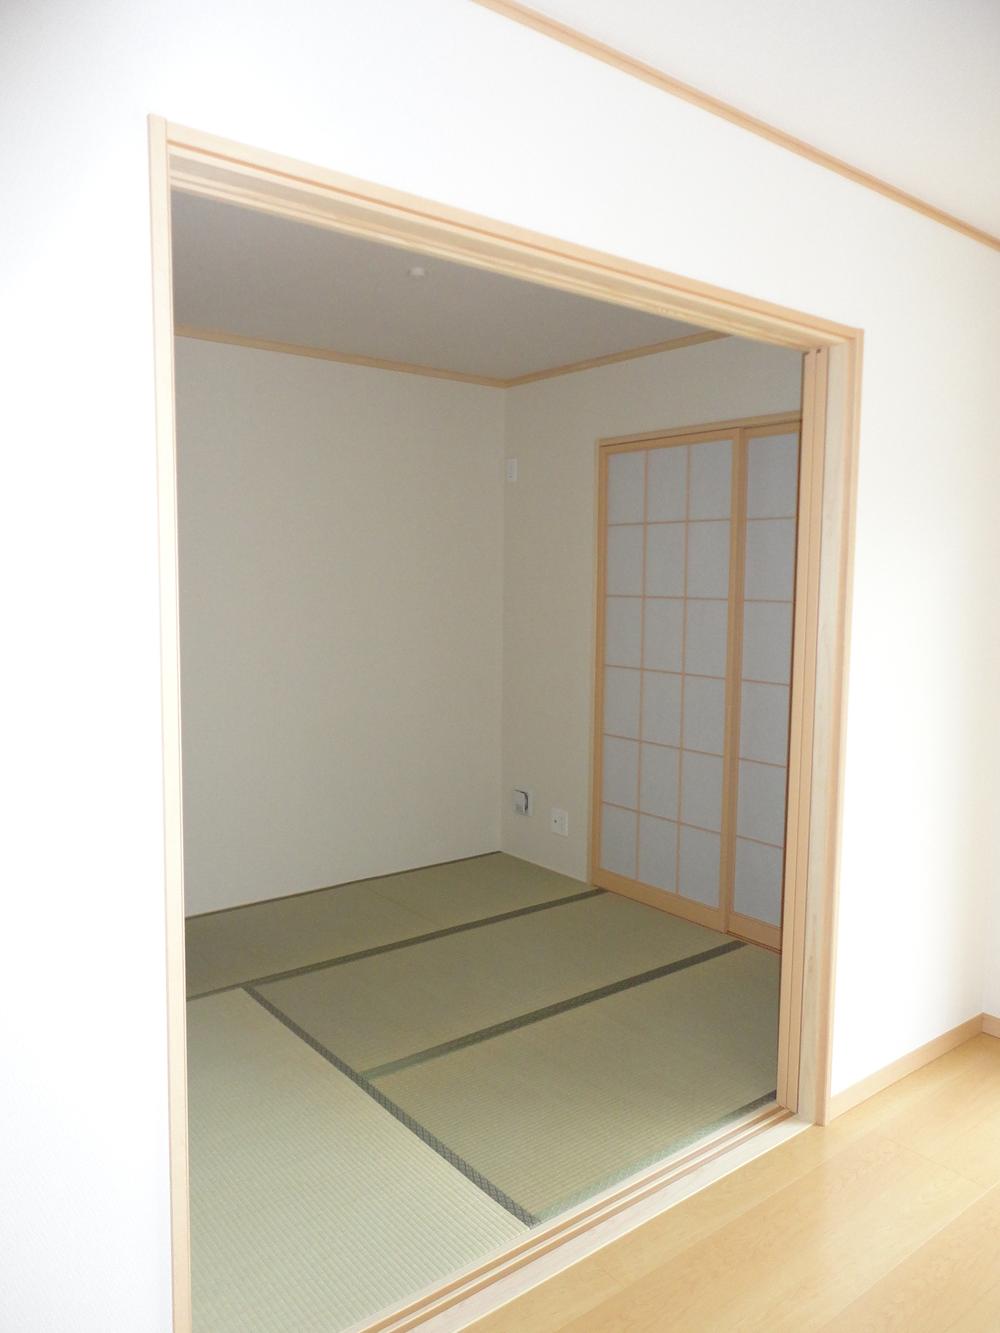 Same specifications photos (Other introspection). Building 3 has Japanese-style room next to the living